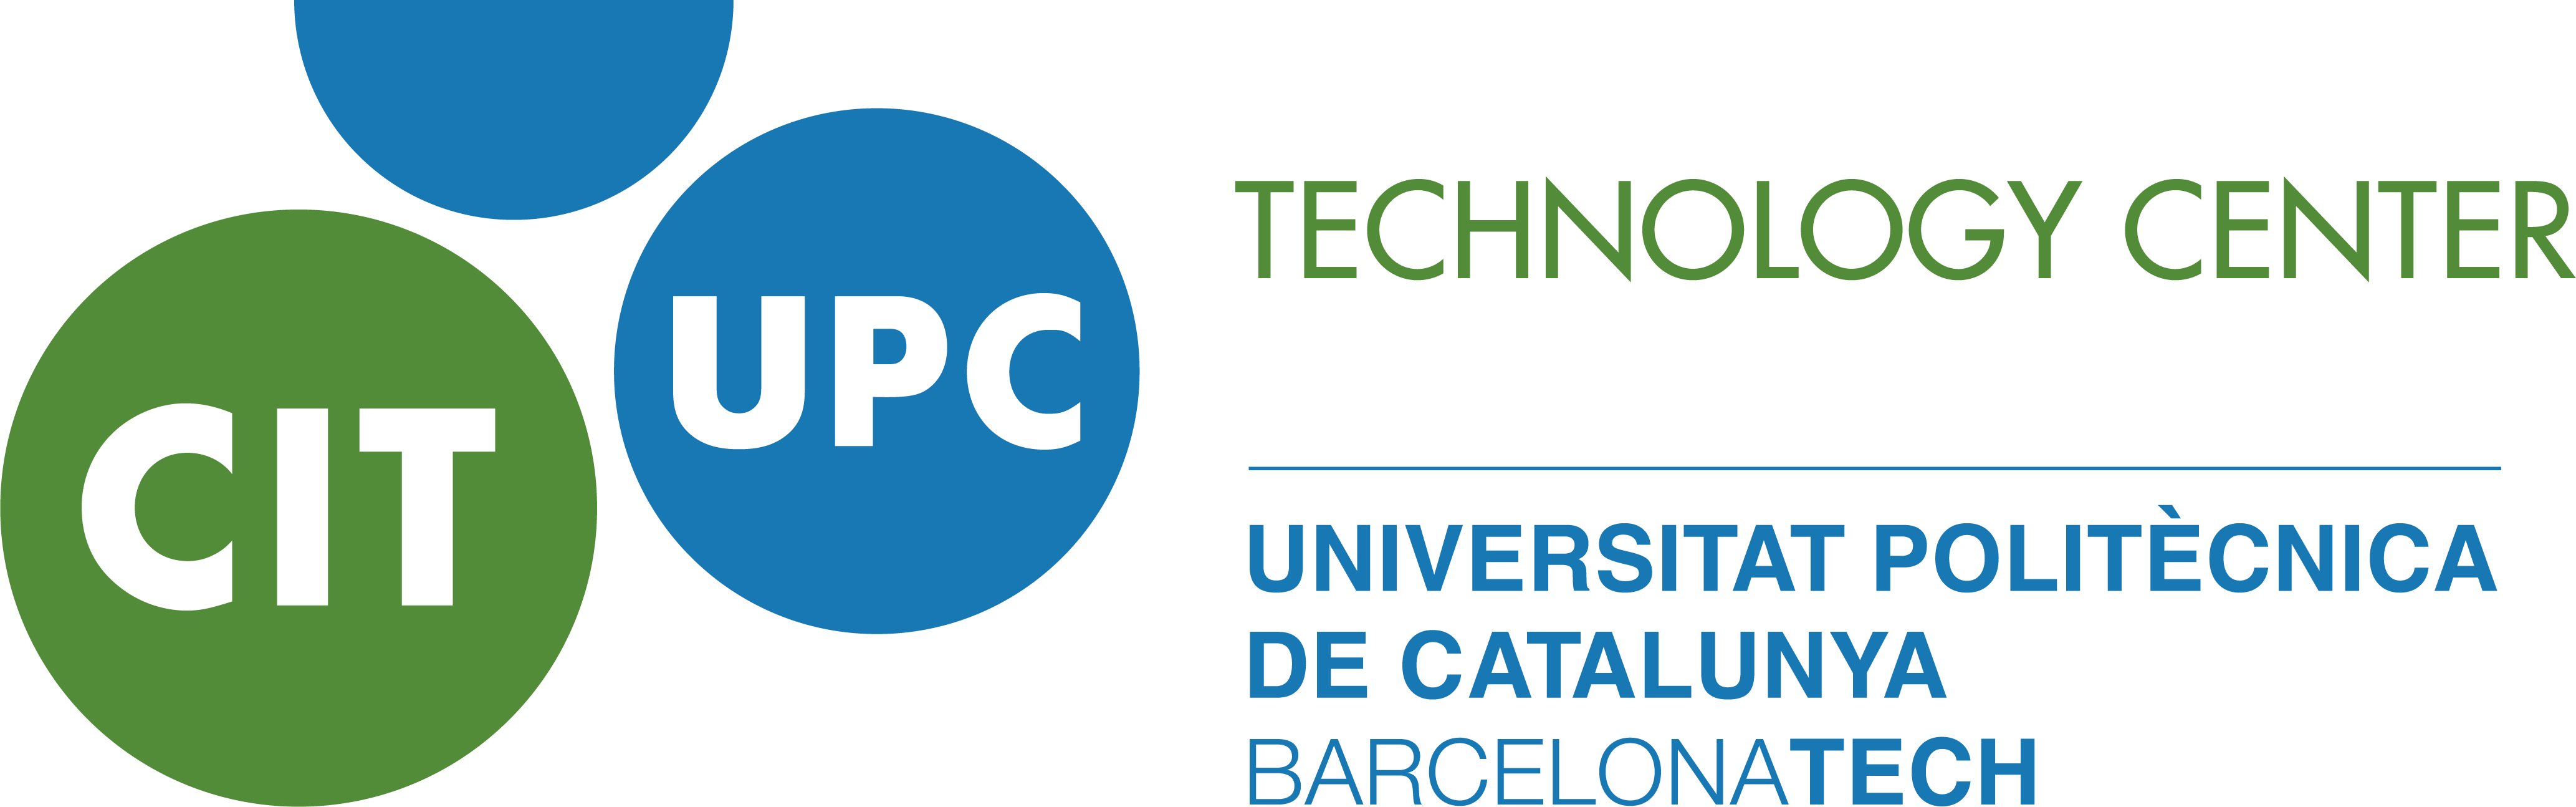 La UPC, the TECNIO Association for promoting technology transfer in Catalonia